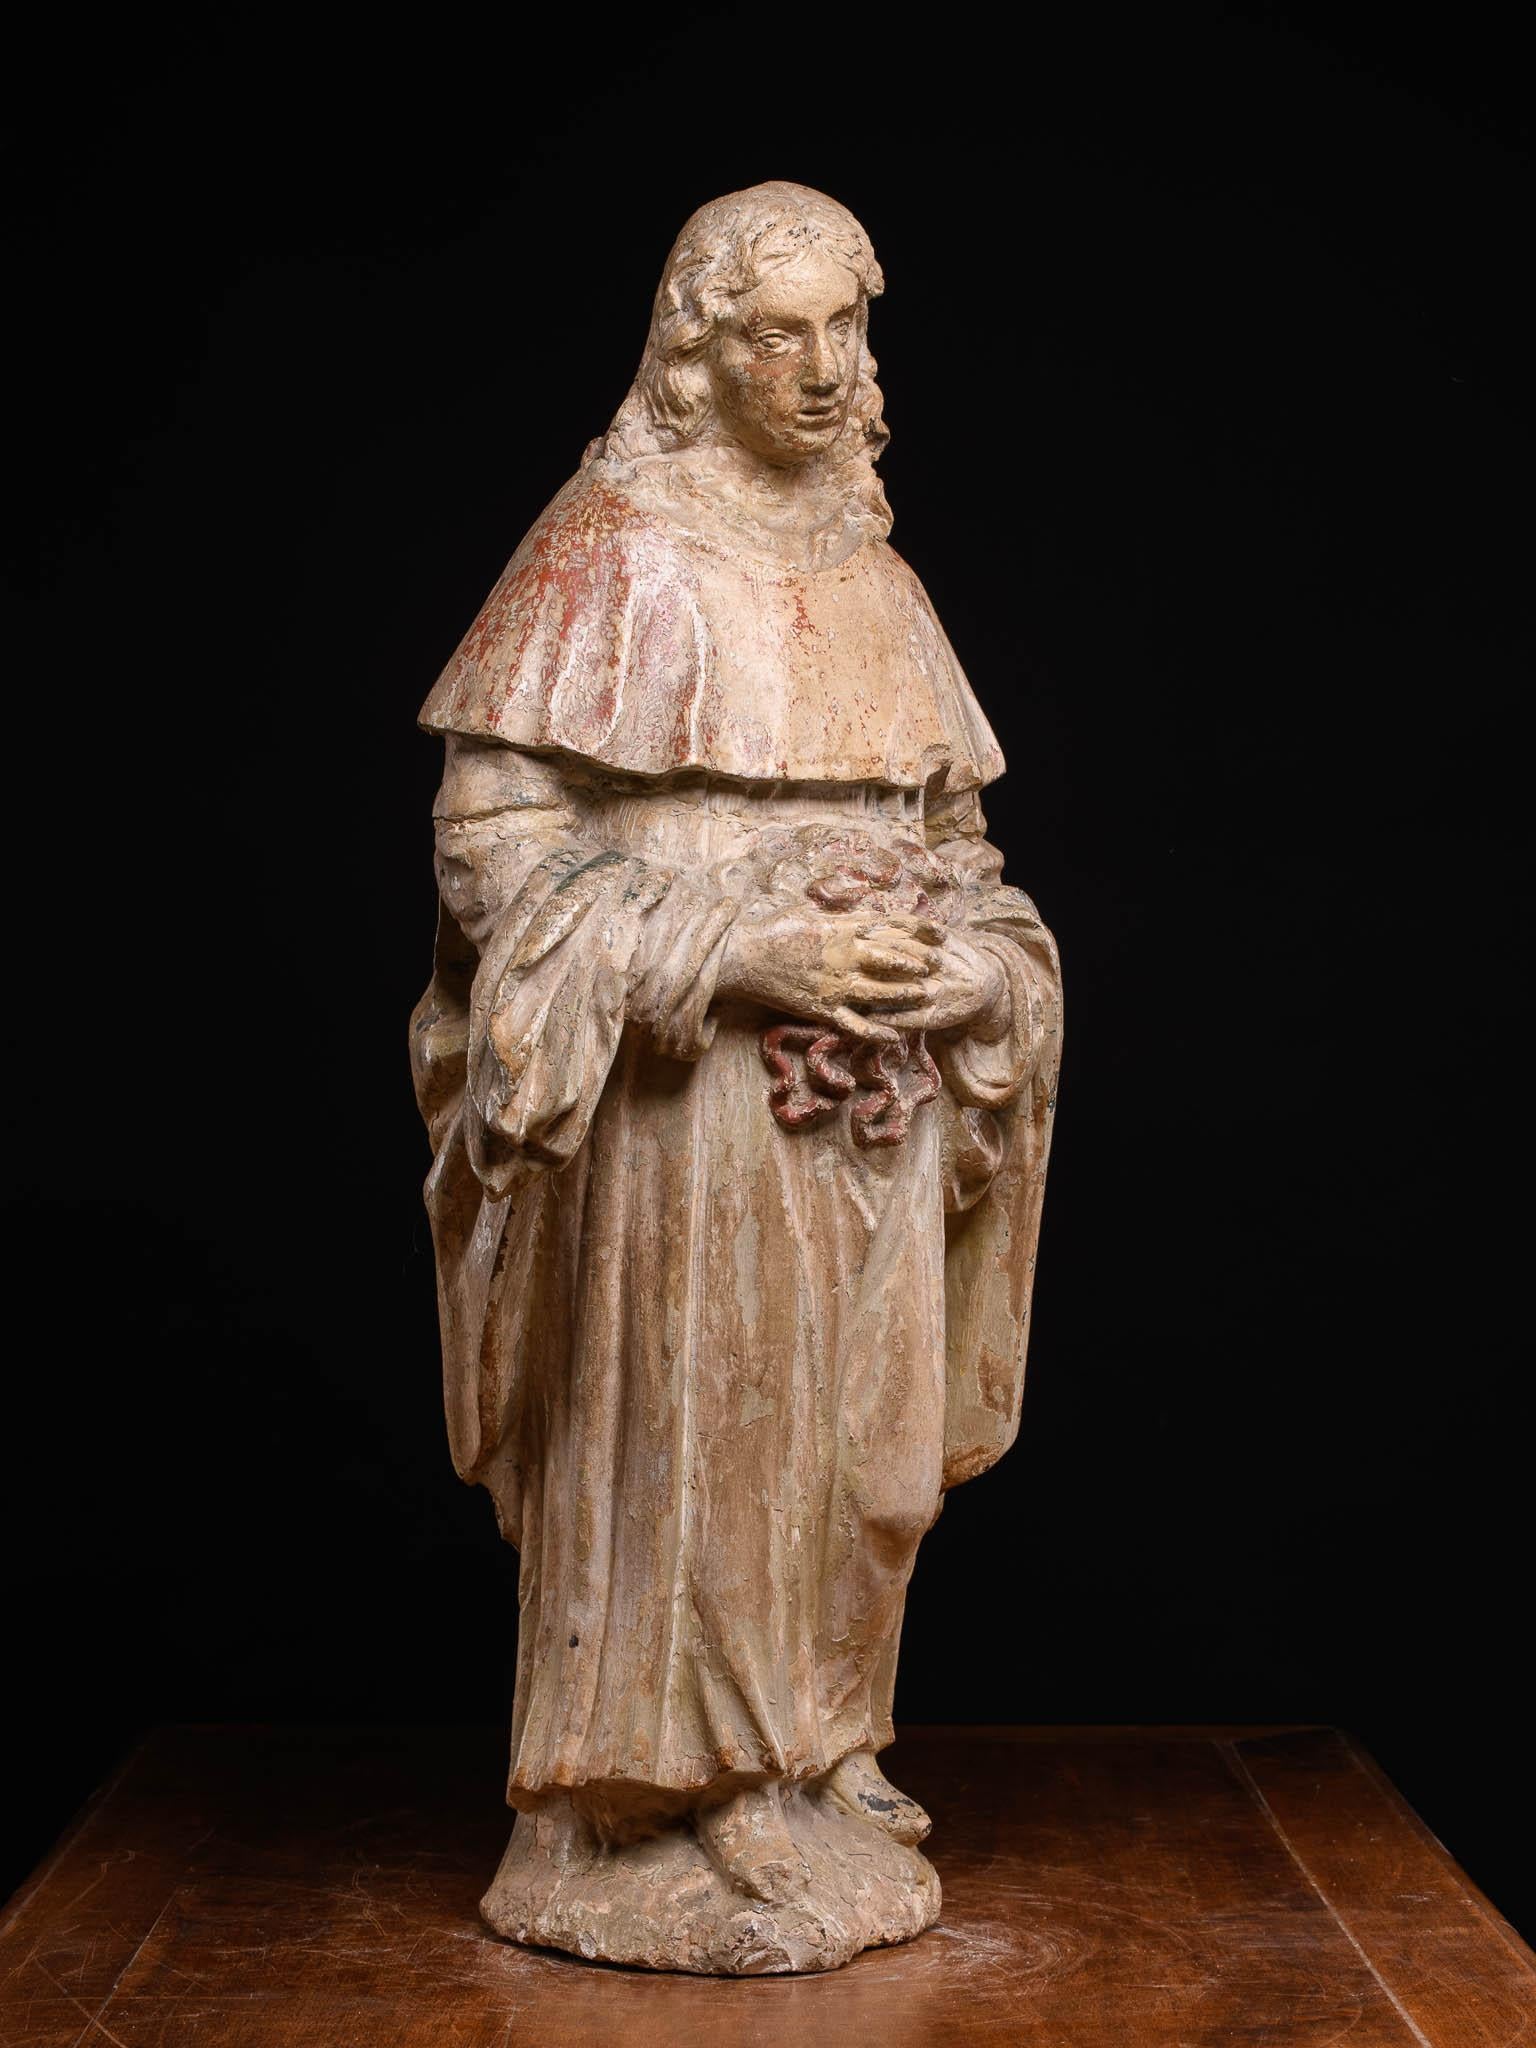 Saint Erasmus or Saint Elmo (Antioch, ca. 240 – Formia, 303) was an Italian bishop and patron saint of the sailors. His attribute was the capstan, a winch on which the anchor chains were rolled up. He died as a martyr for his faith, and his bones